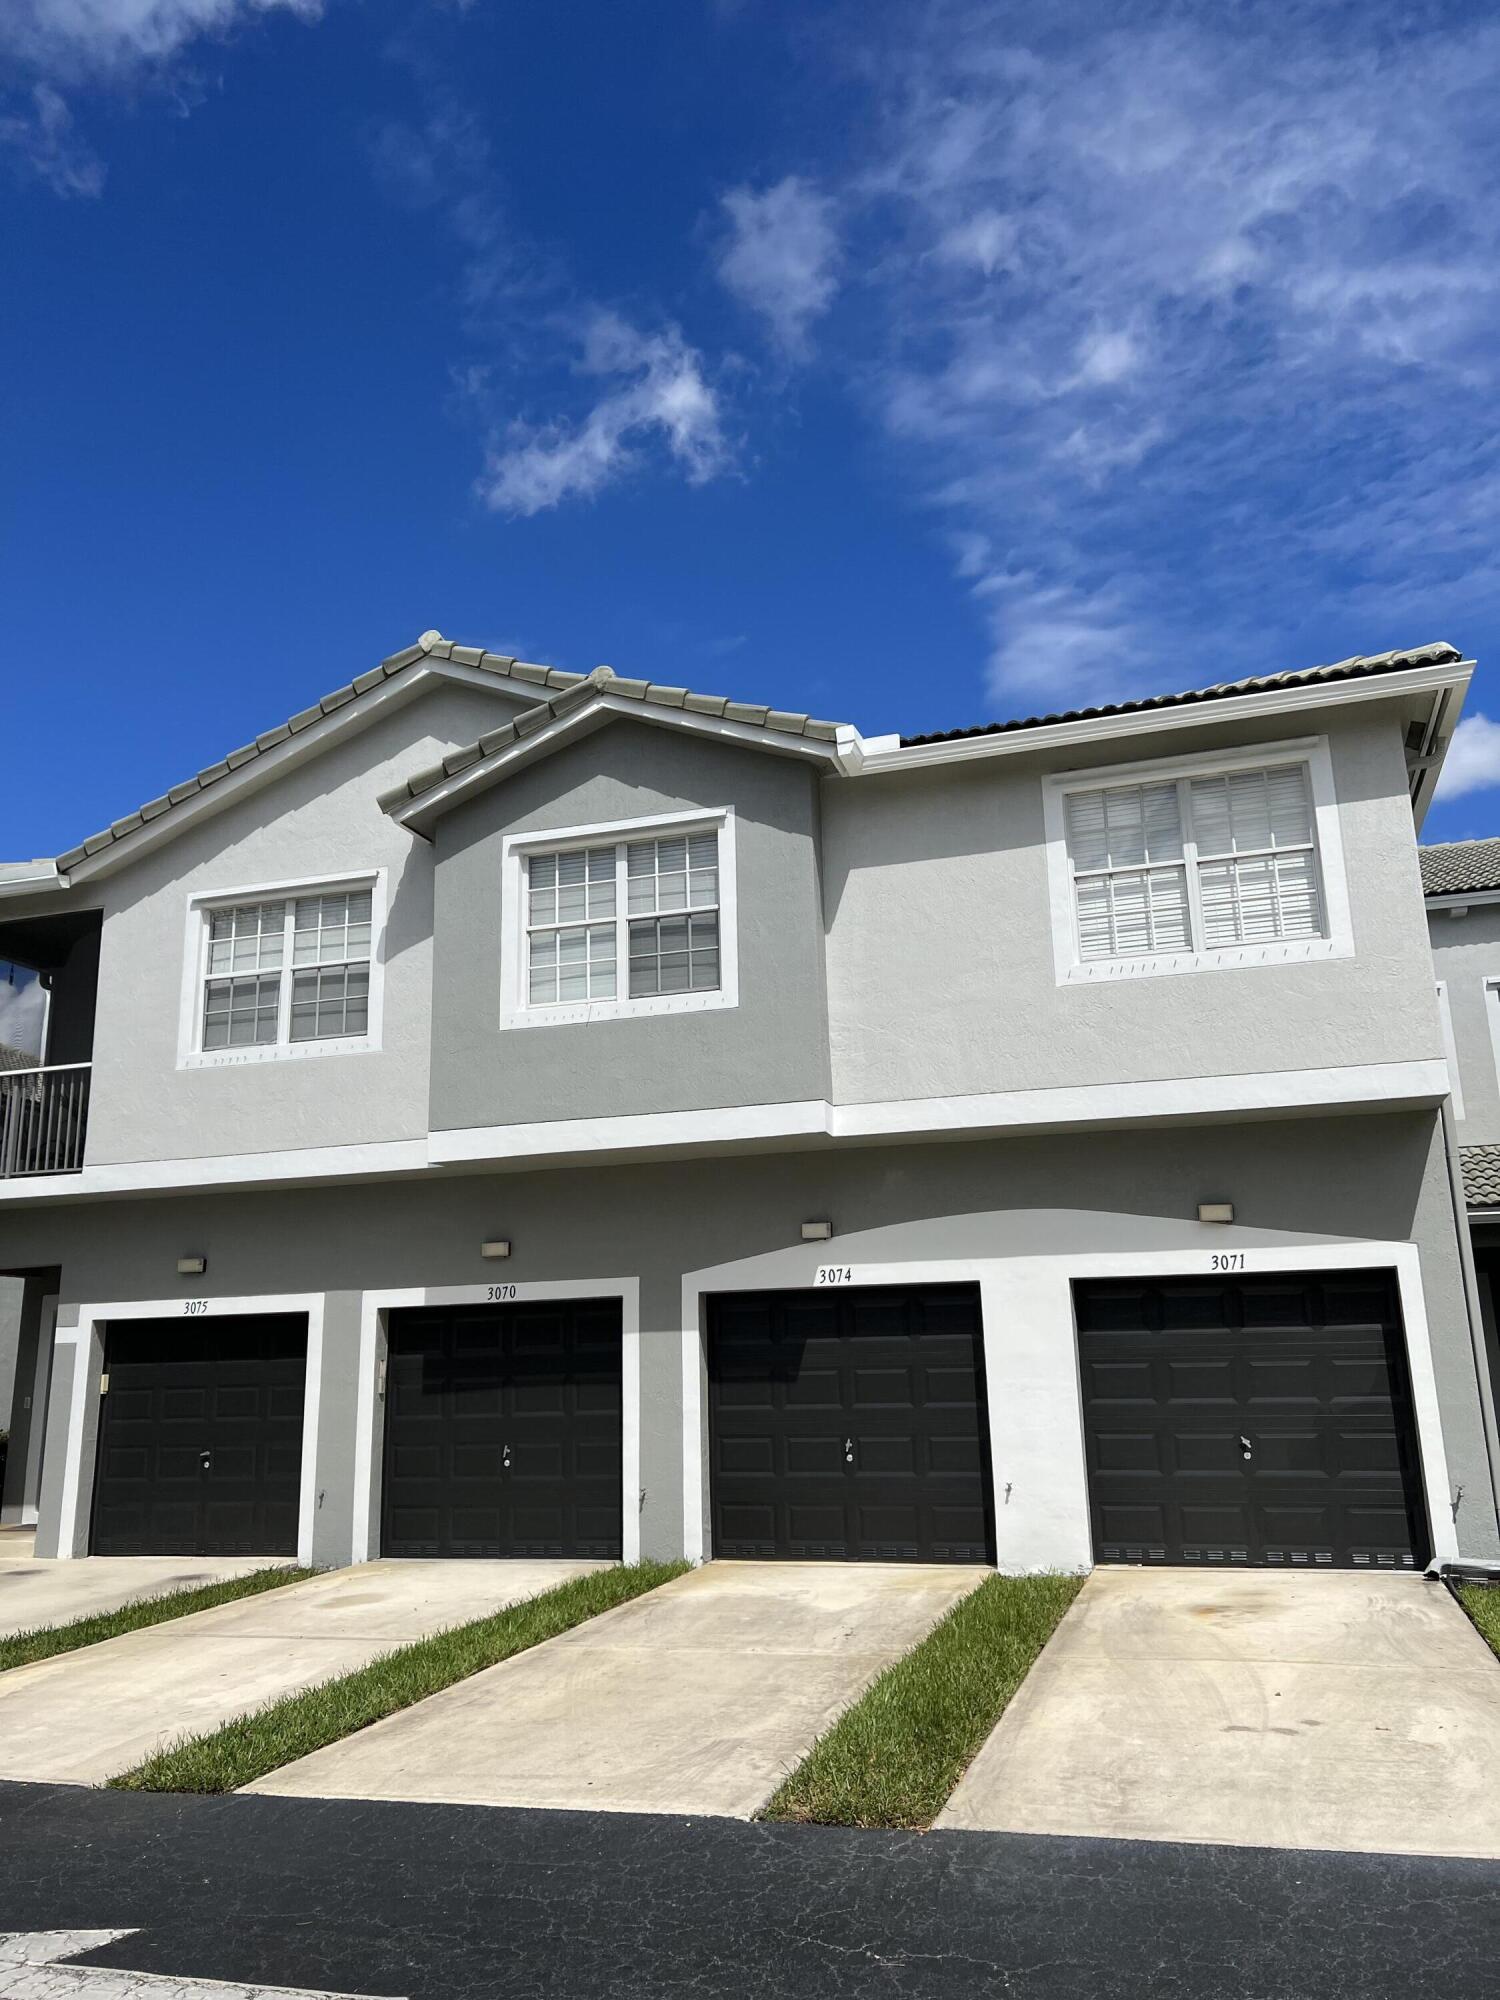 VERY NICE TOWNHOUSE IN GATED COMMUNITY. LOCATED IN THE HEART OF GREENACRES, UNIT COMES WITH MANY UPGRADES.  WATER AND ALARM MONITORING IS INCLUDED. unit is currently tenant occupied.